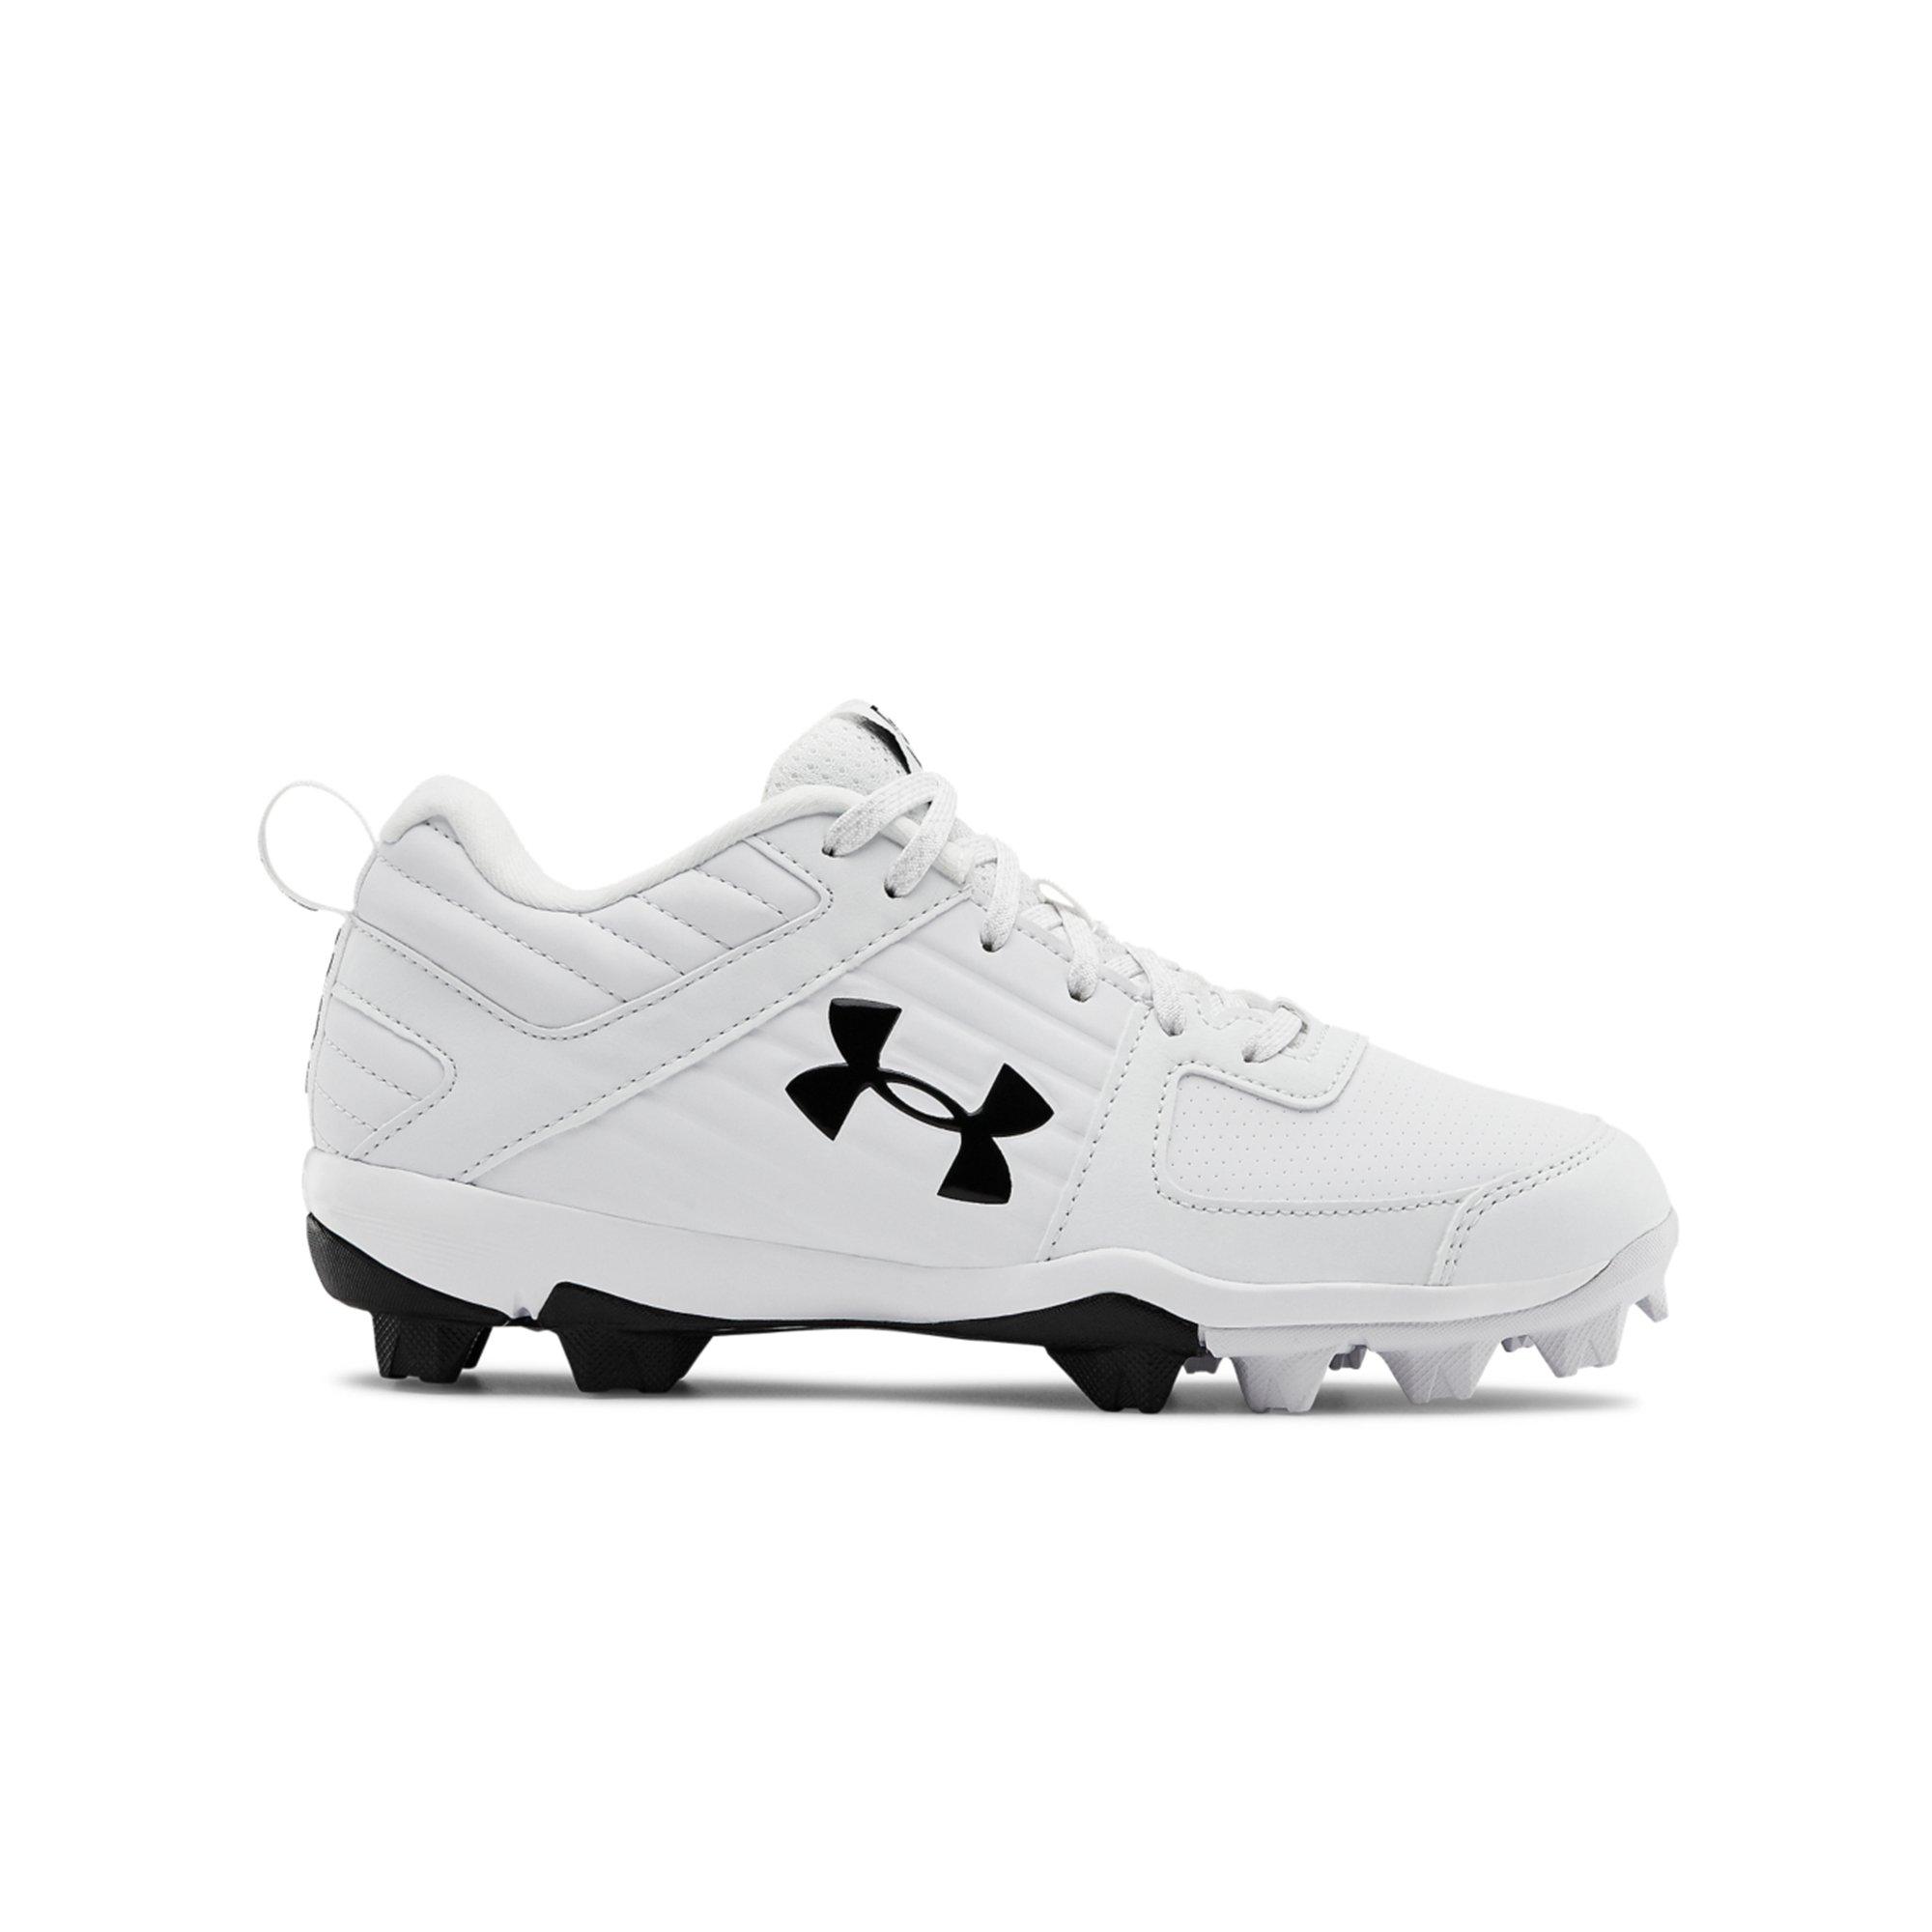 Details about   Boys Under Armour 1297316-100 Leadoff Low RM Baseball Cleats Sliver 